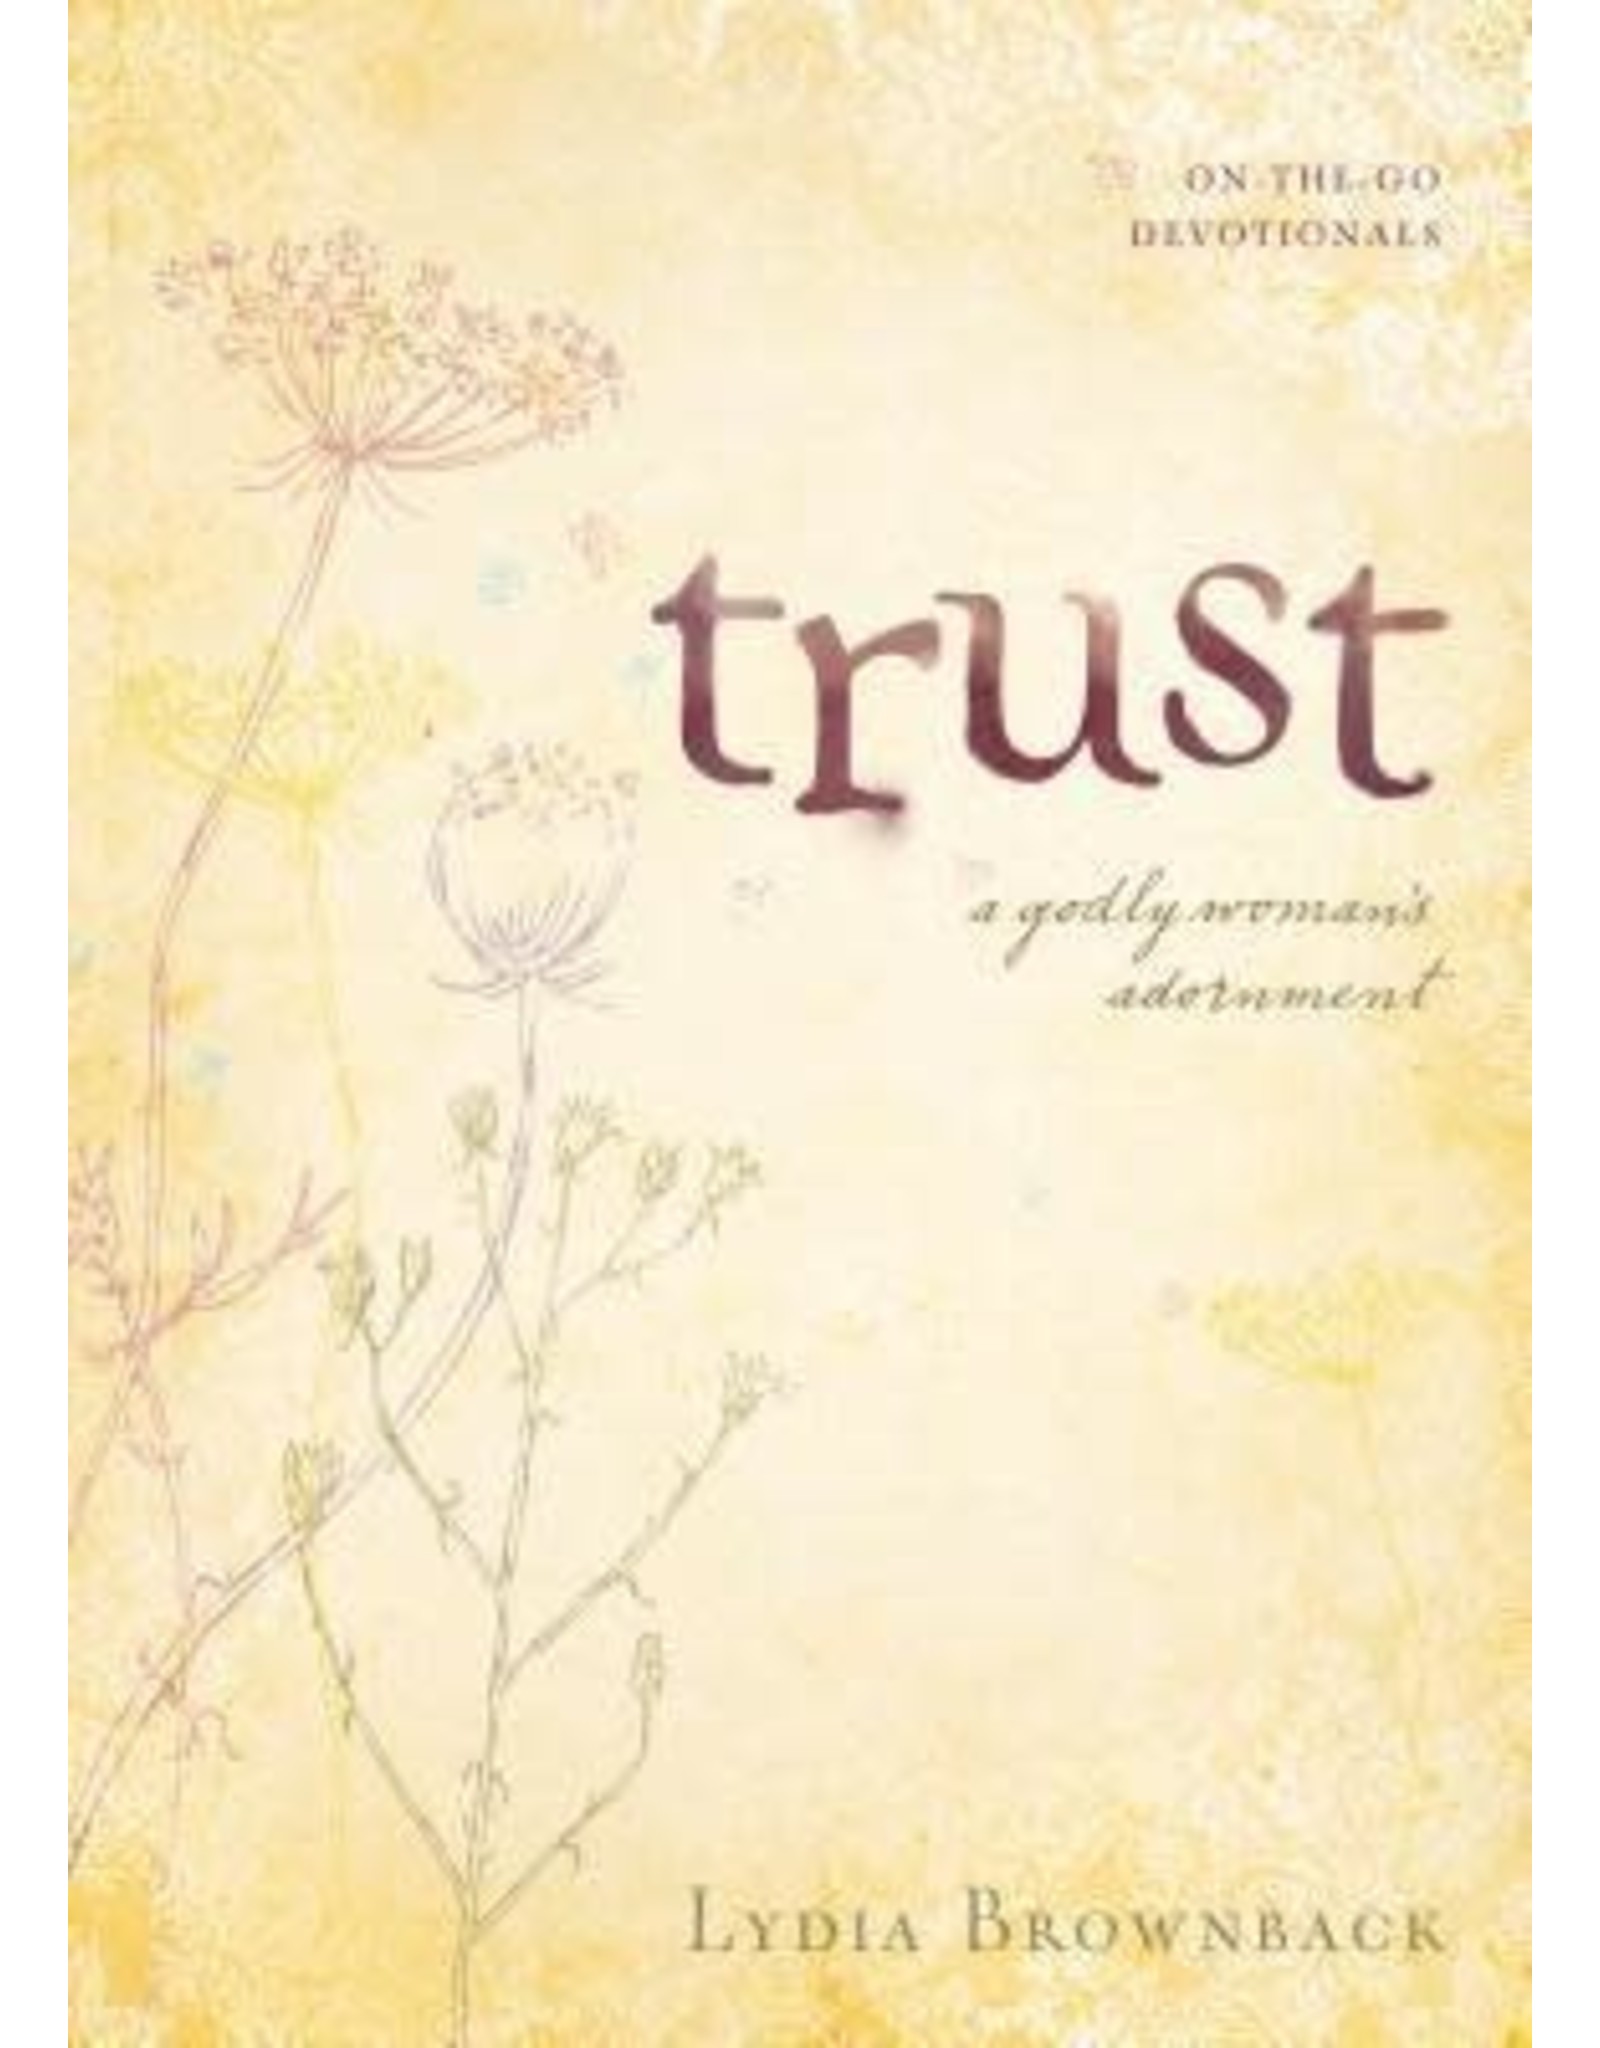 Lydia Brownback Trust: A Godly Woman's Adornment